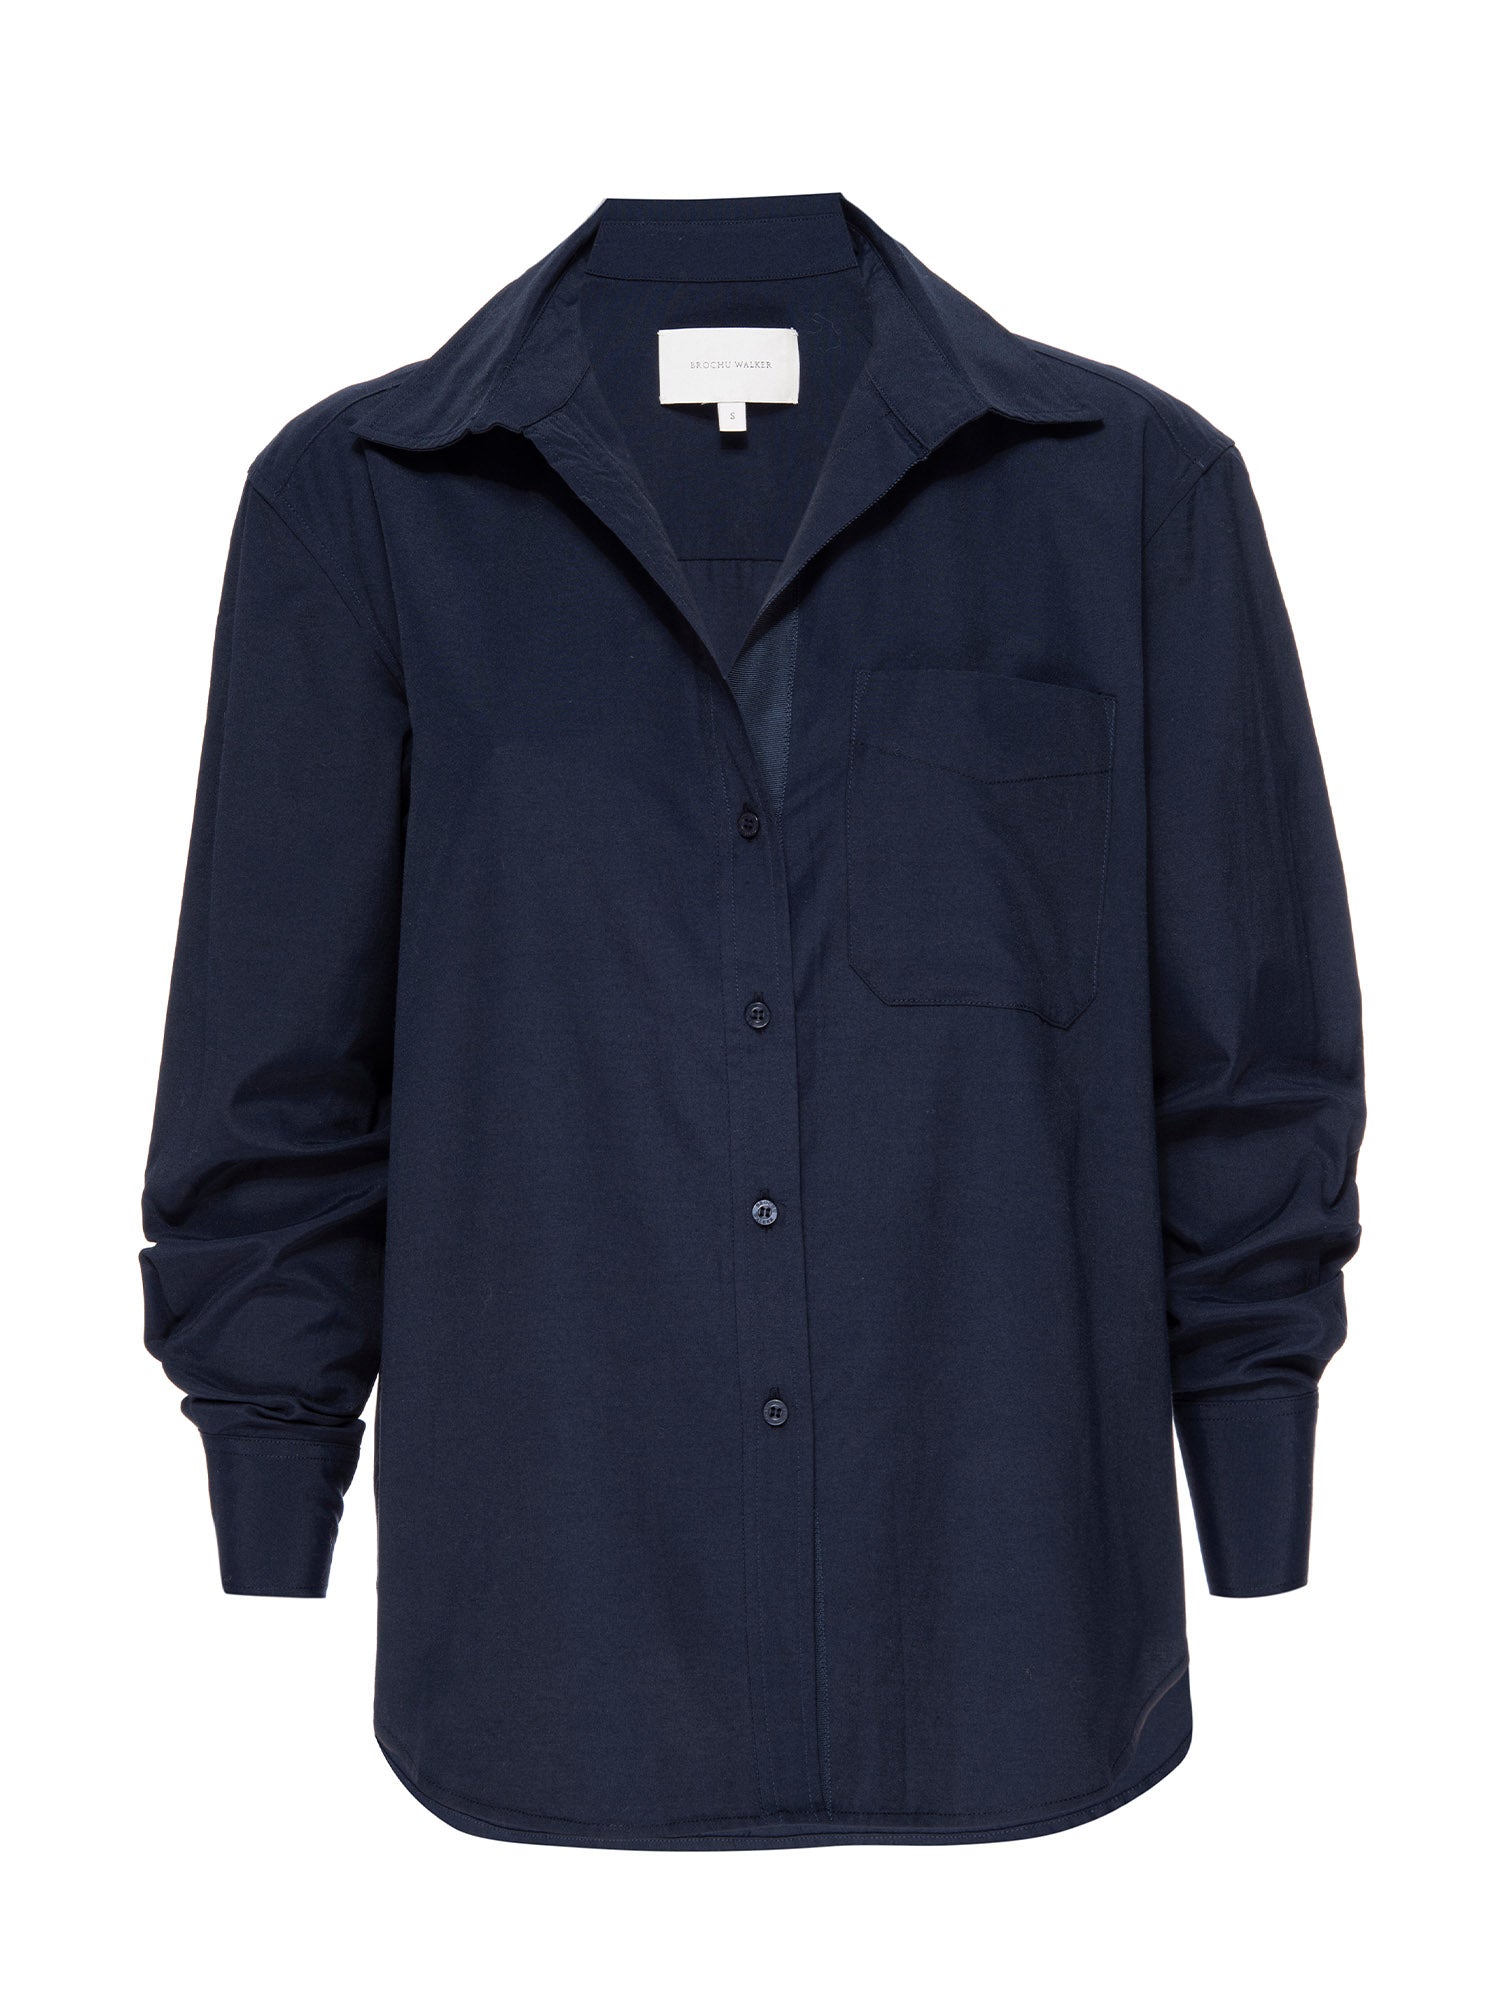 Everyday button up navy shirt flat view